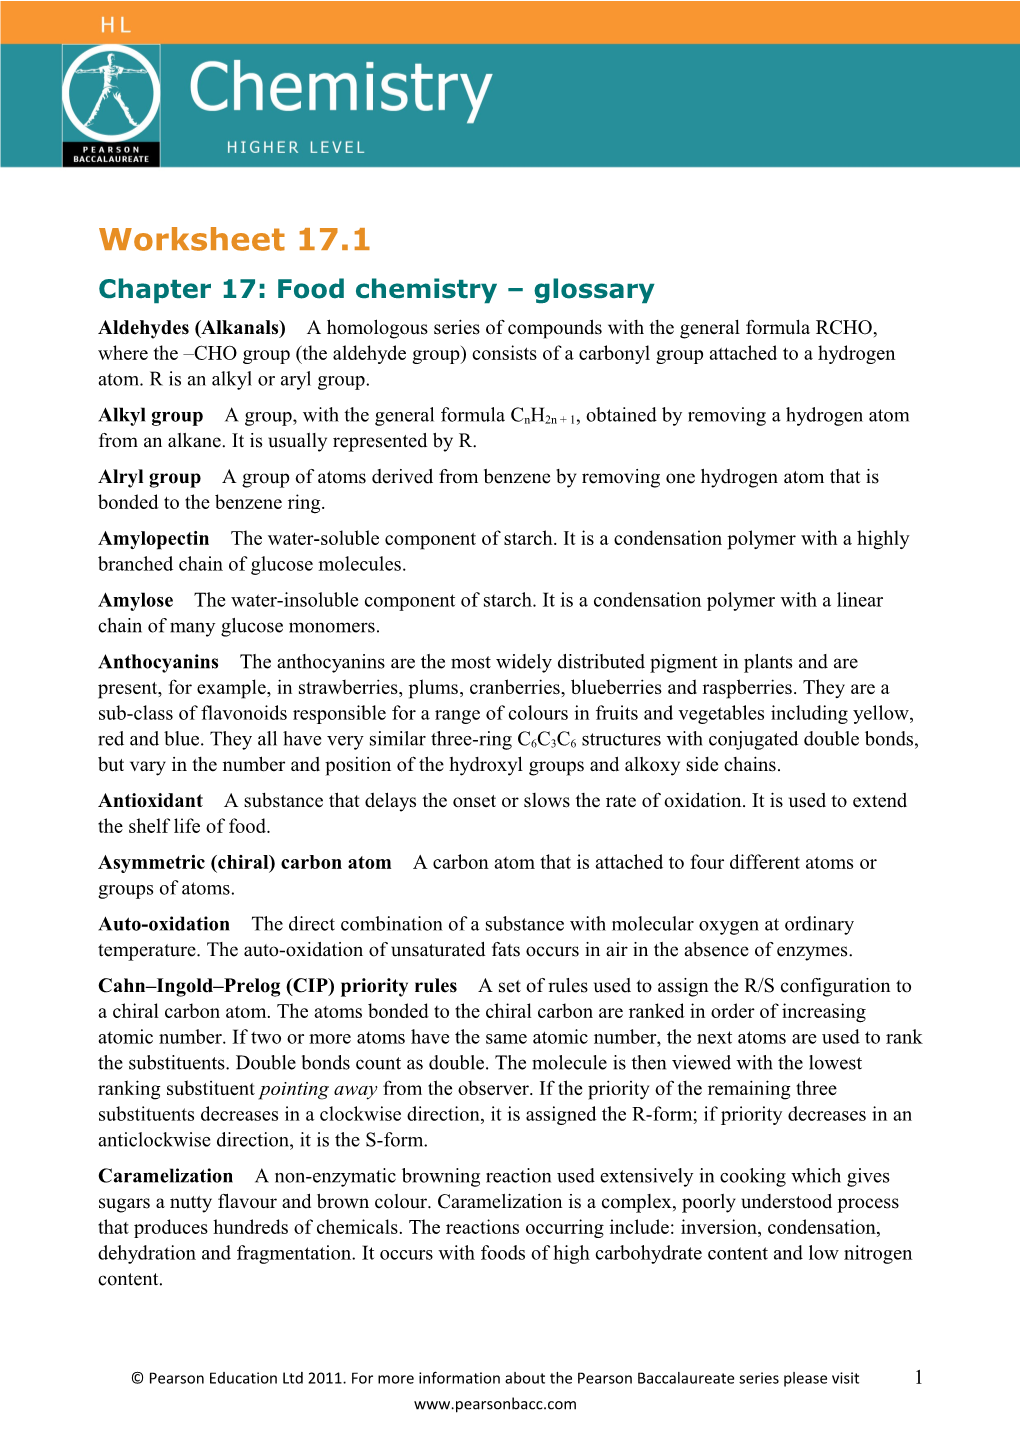 Chapter 17: Food Chemistry Glossary